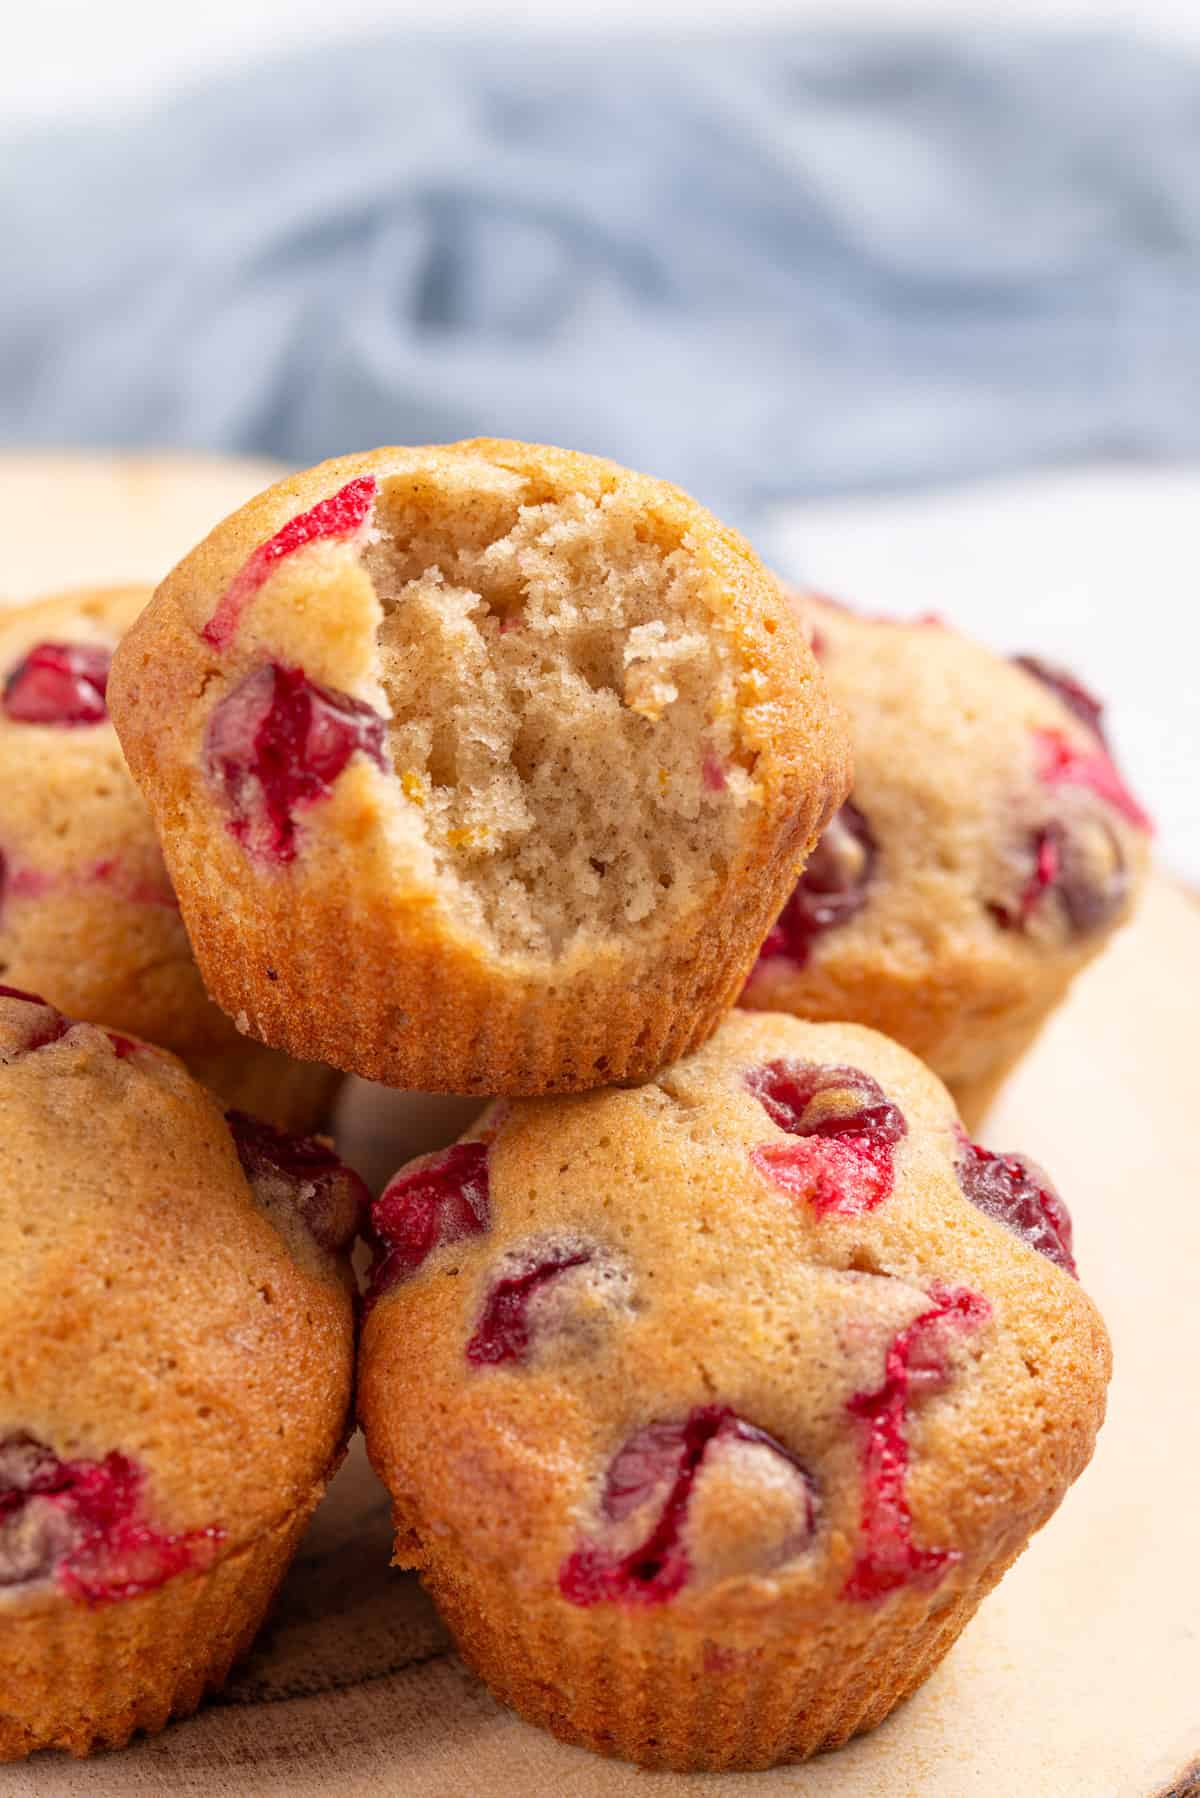 An image of a batch of cranberry orange muffins, one muffin with a bite stacked on top of the others, on a wooden serving board.